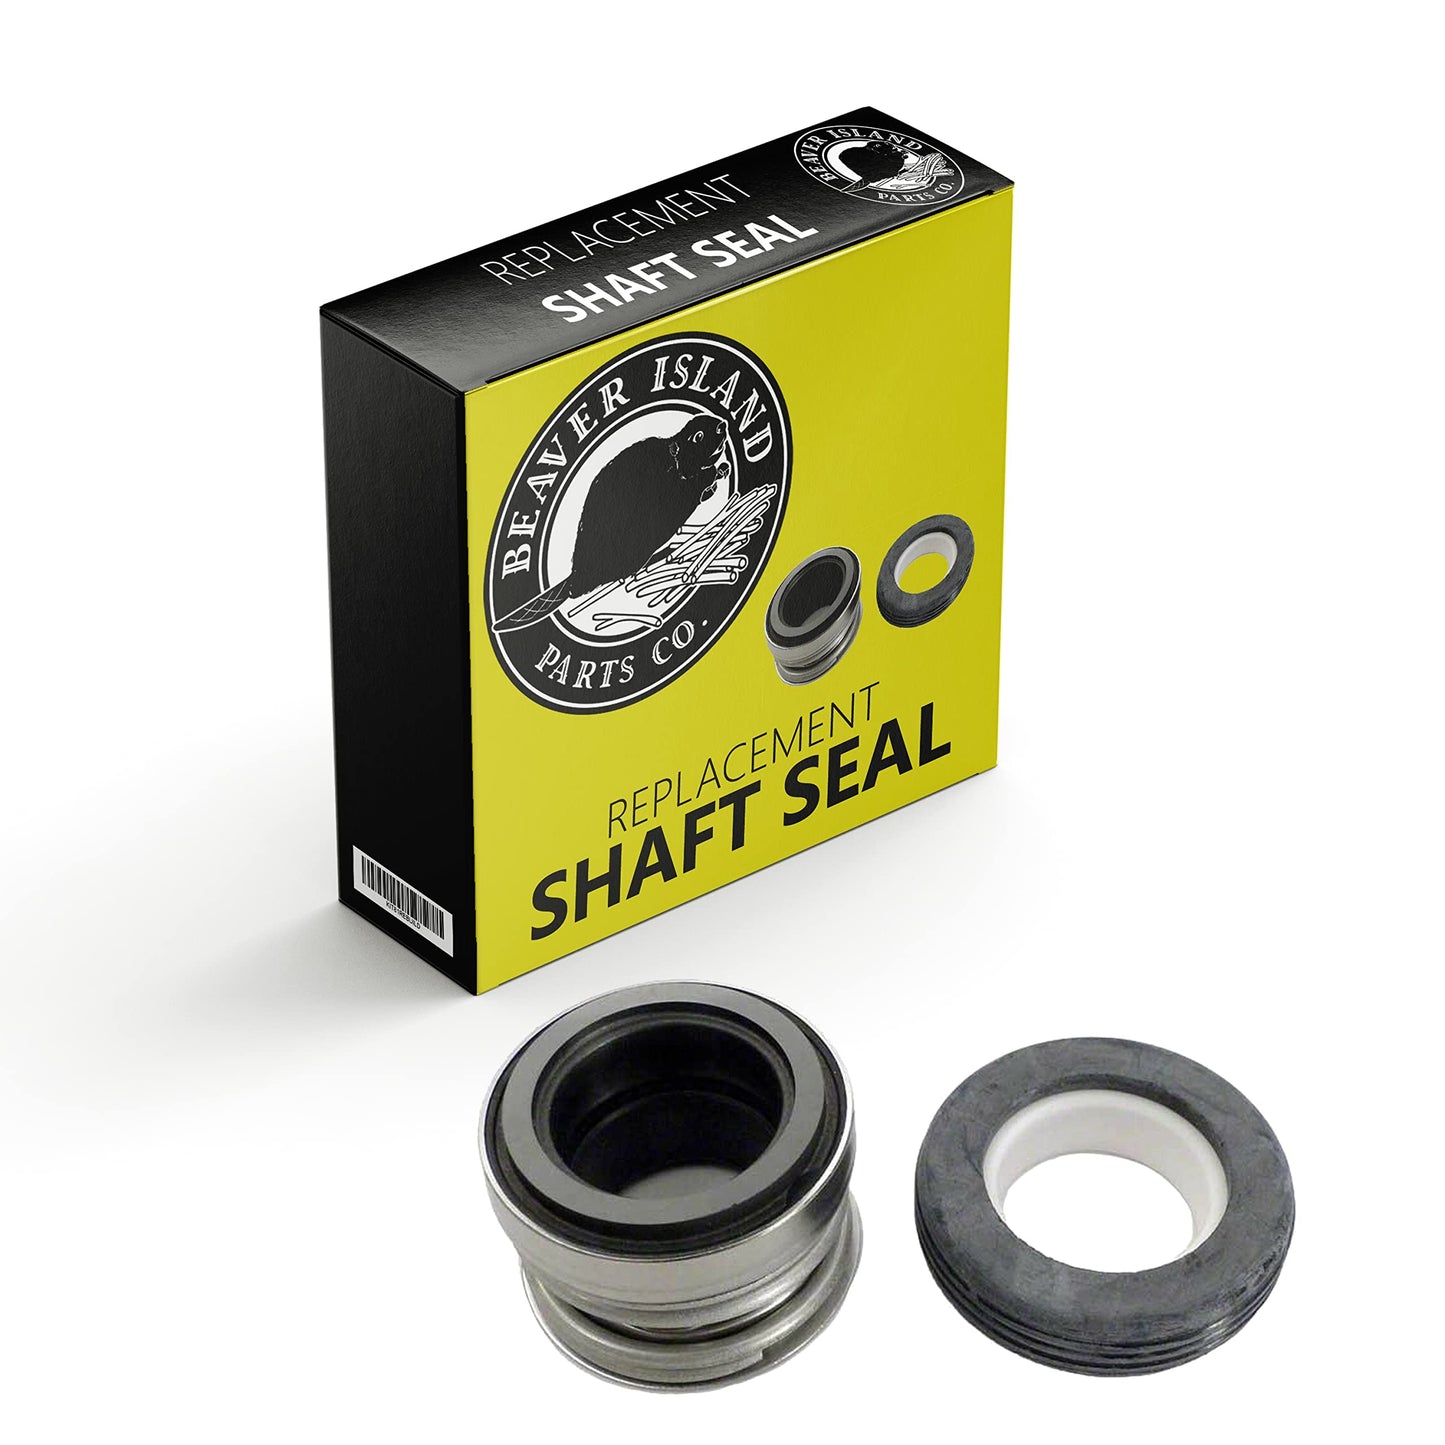 Shaft Seal Replacement for Jandy Stealth MHP Series R0445500 Pump Motor Mechanical Seal